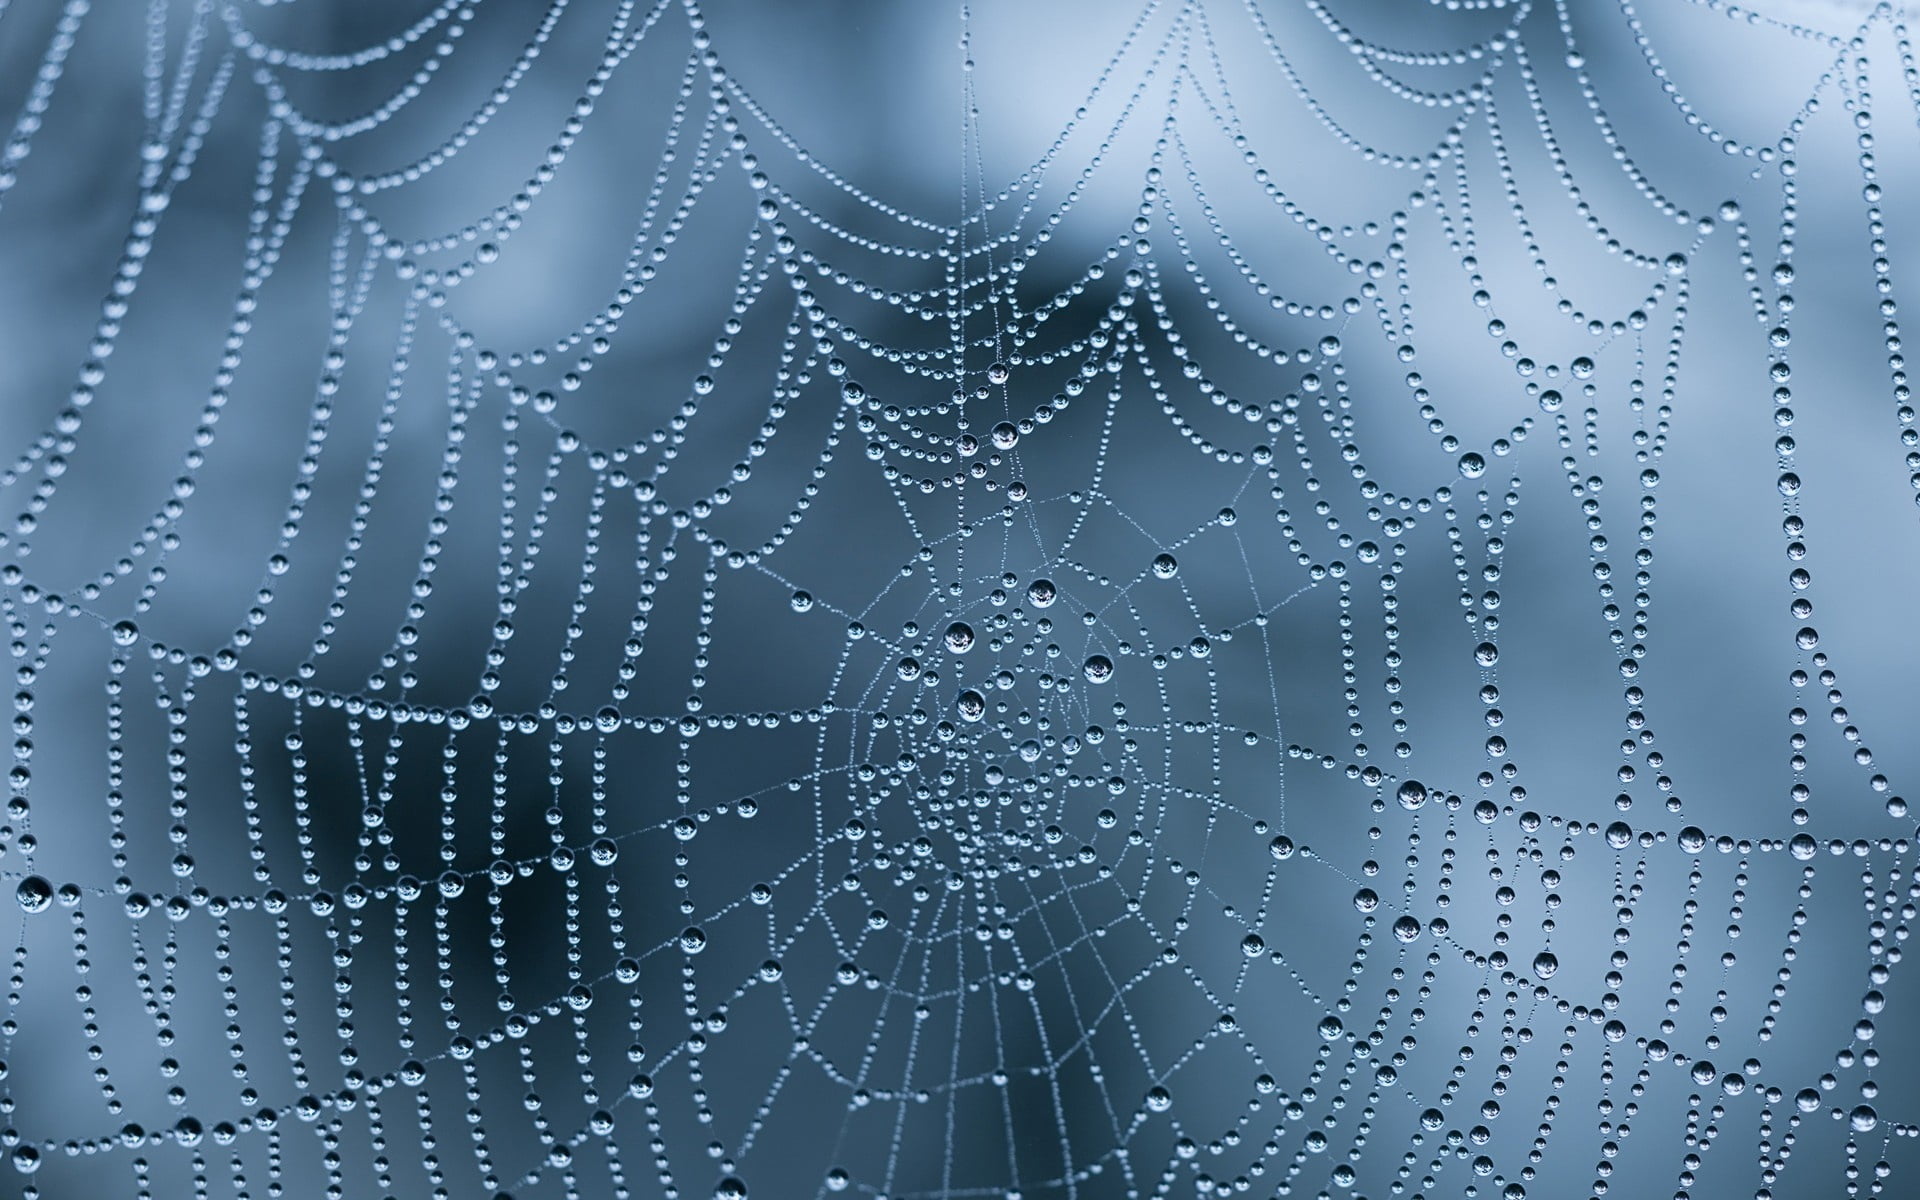 white spider web, drops, wet, nature, dew, backgrounds, close-up